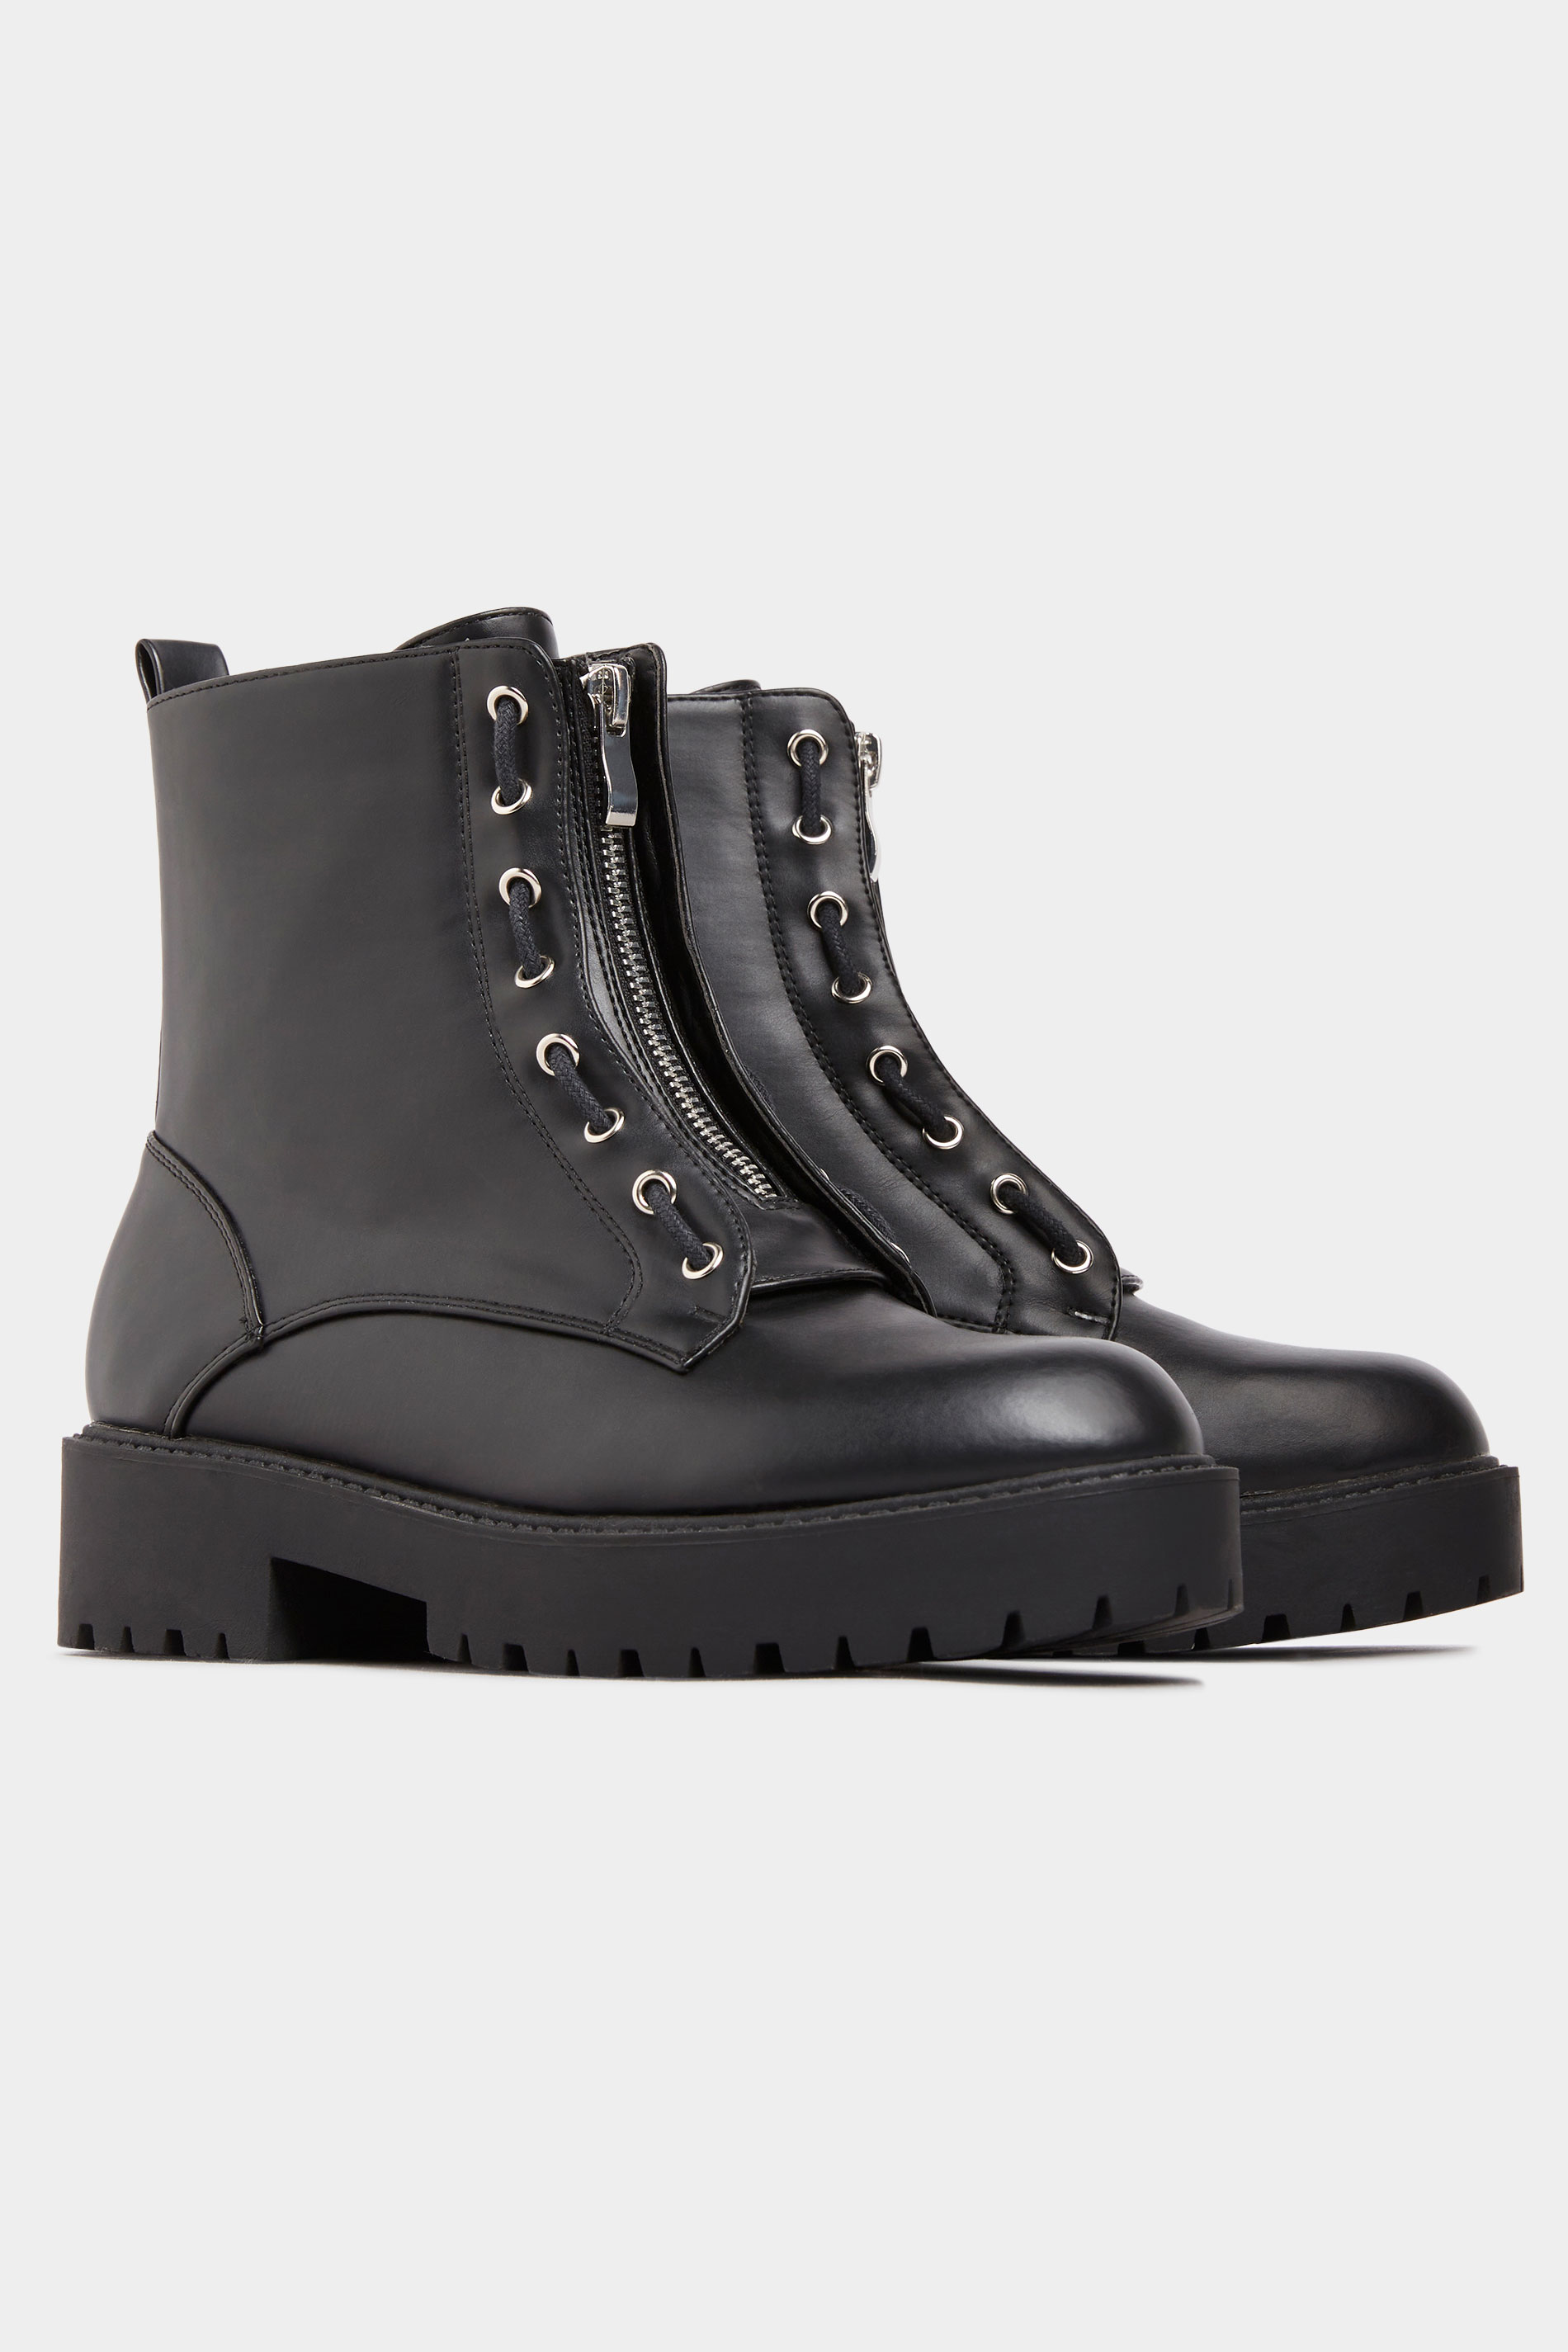 LIMITED COLLECTION Black Vegan Faux Leather Zip Chunky Boots In Wide Fit_C.jpg